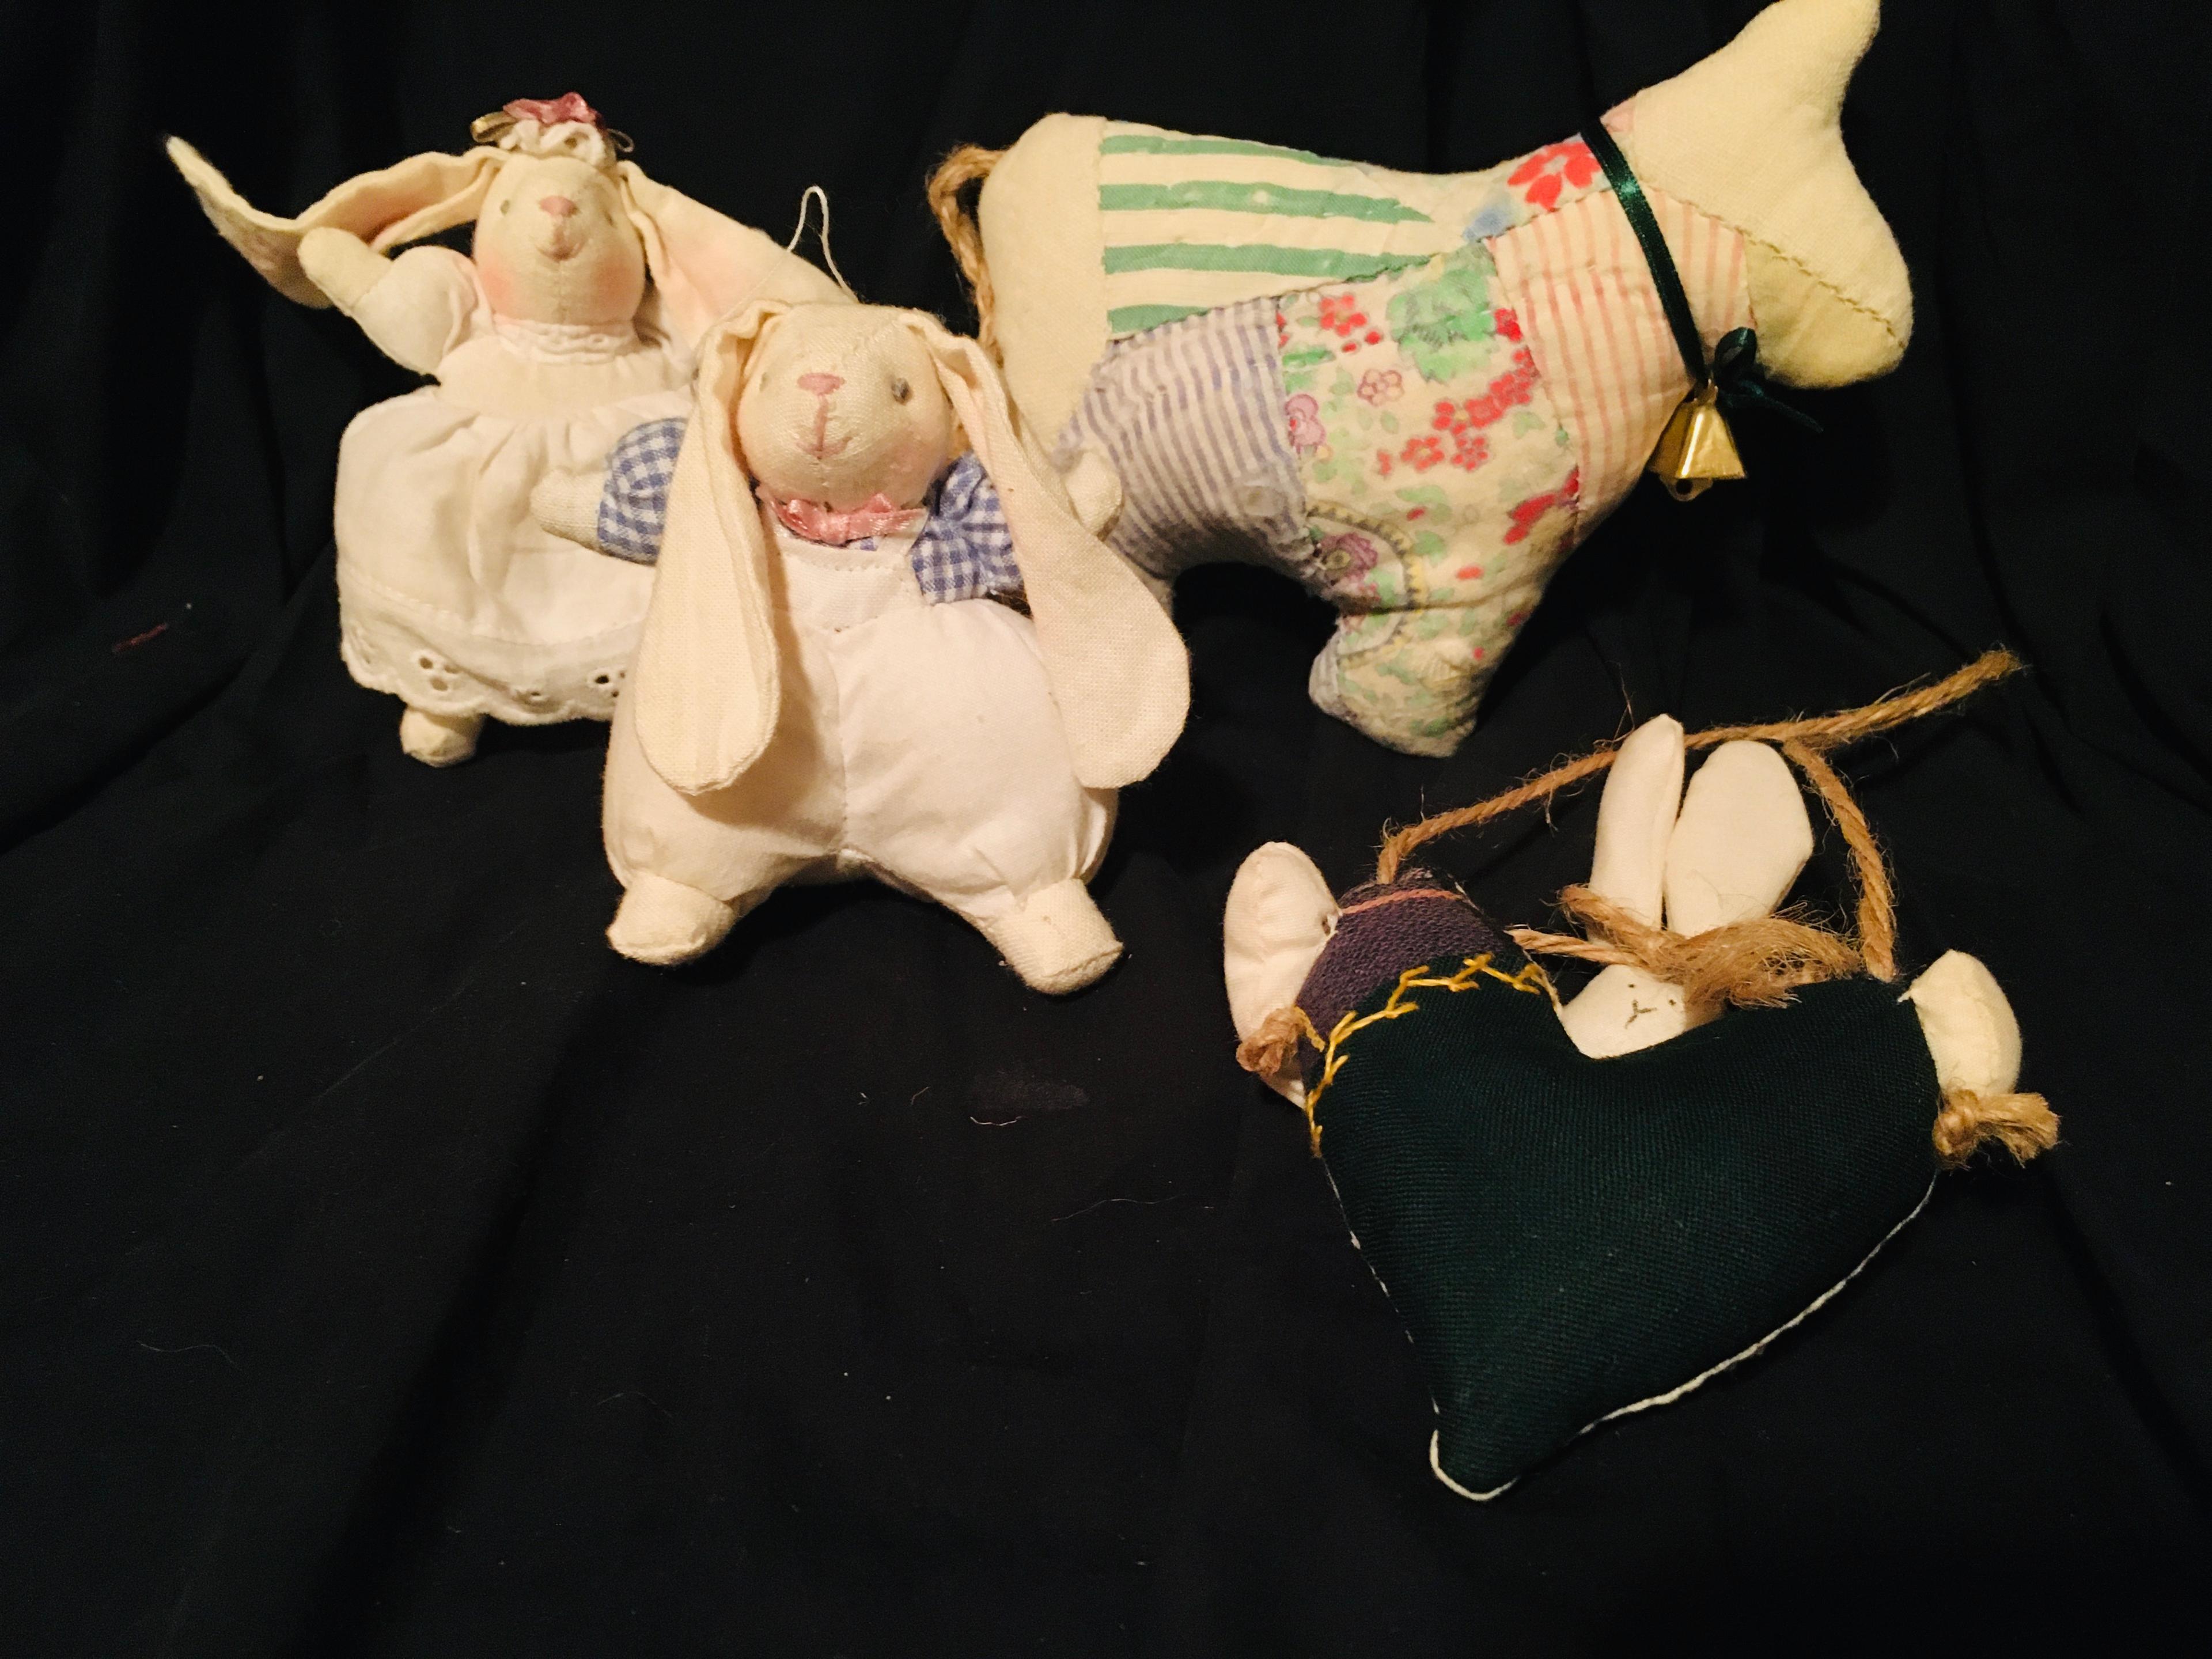 1998 Pantry Basket with Protector filled with Primitive Country Styled Bunnies.